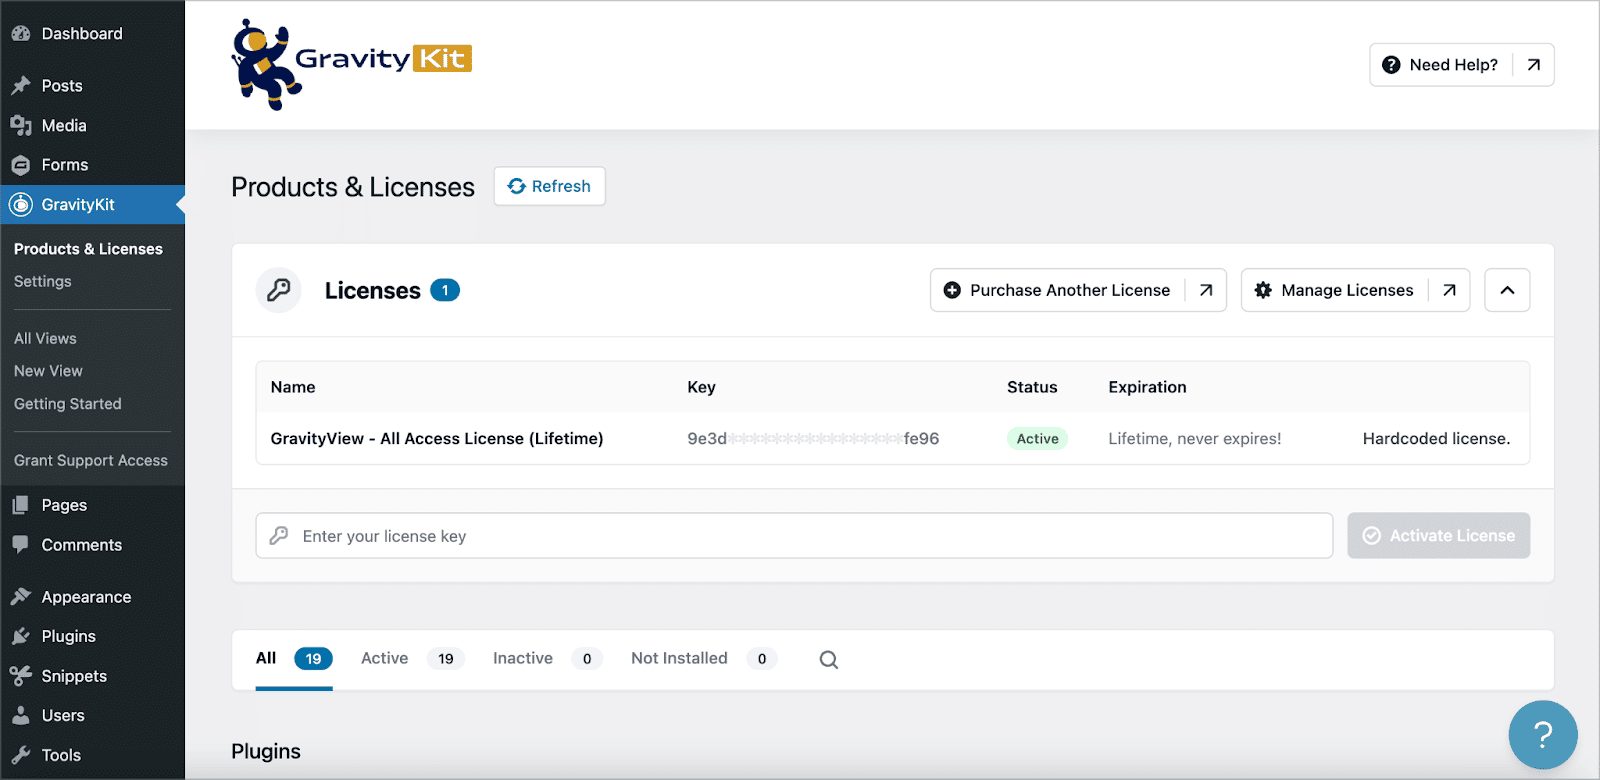 The new "Products & Licenses" screen in WordPress for managing GravityKit products and licenses